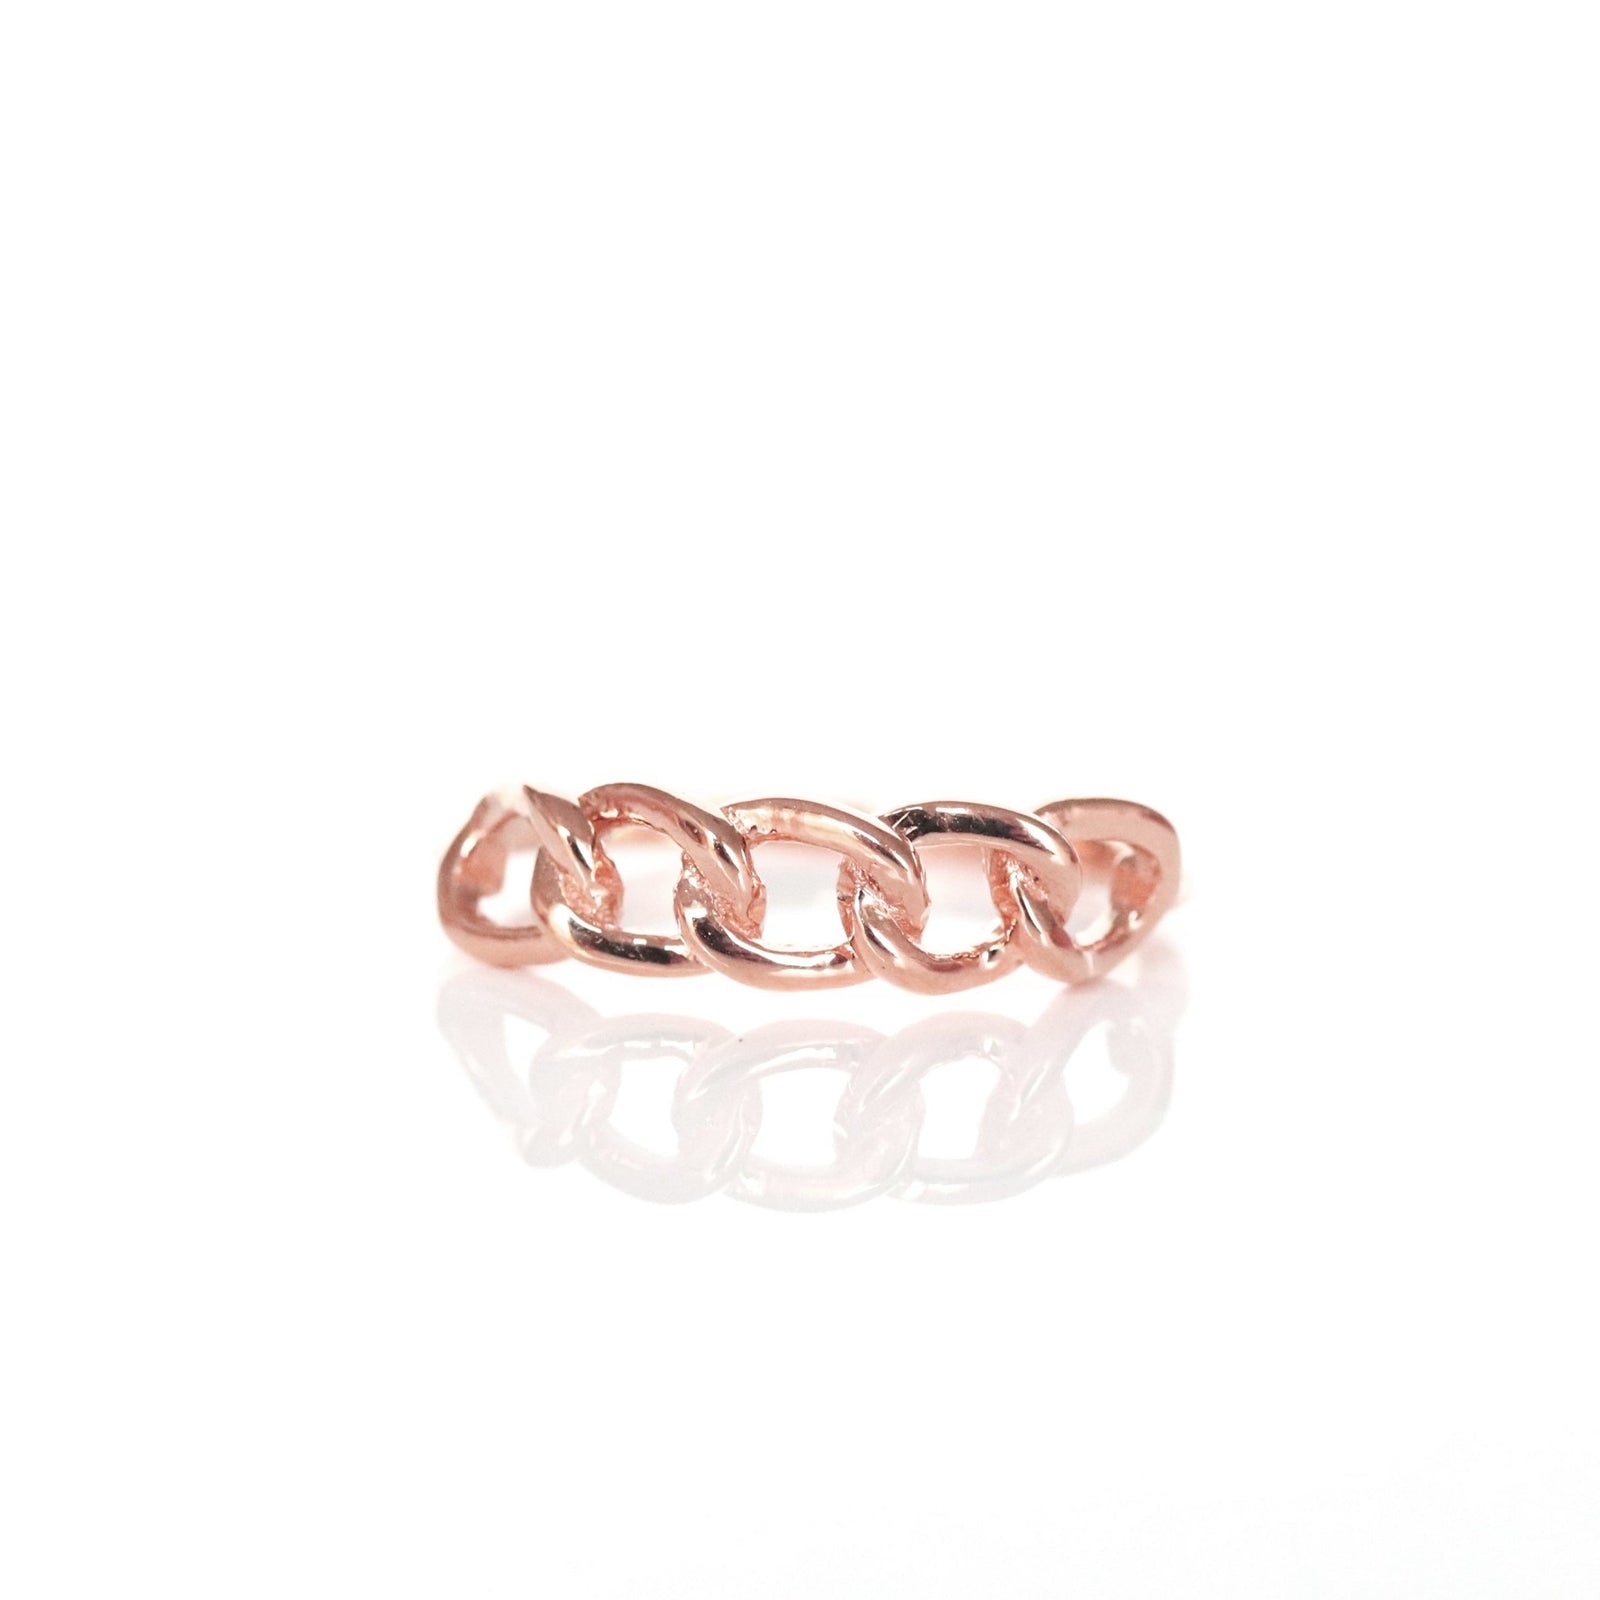 RINGS | Shop Rings Online - SO PRETTY CARA COTTER